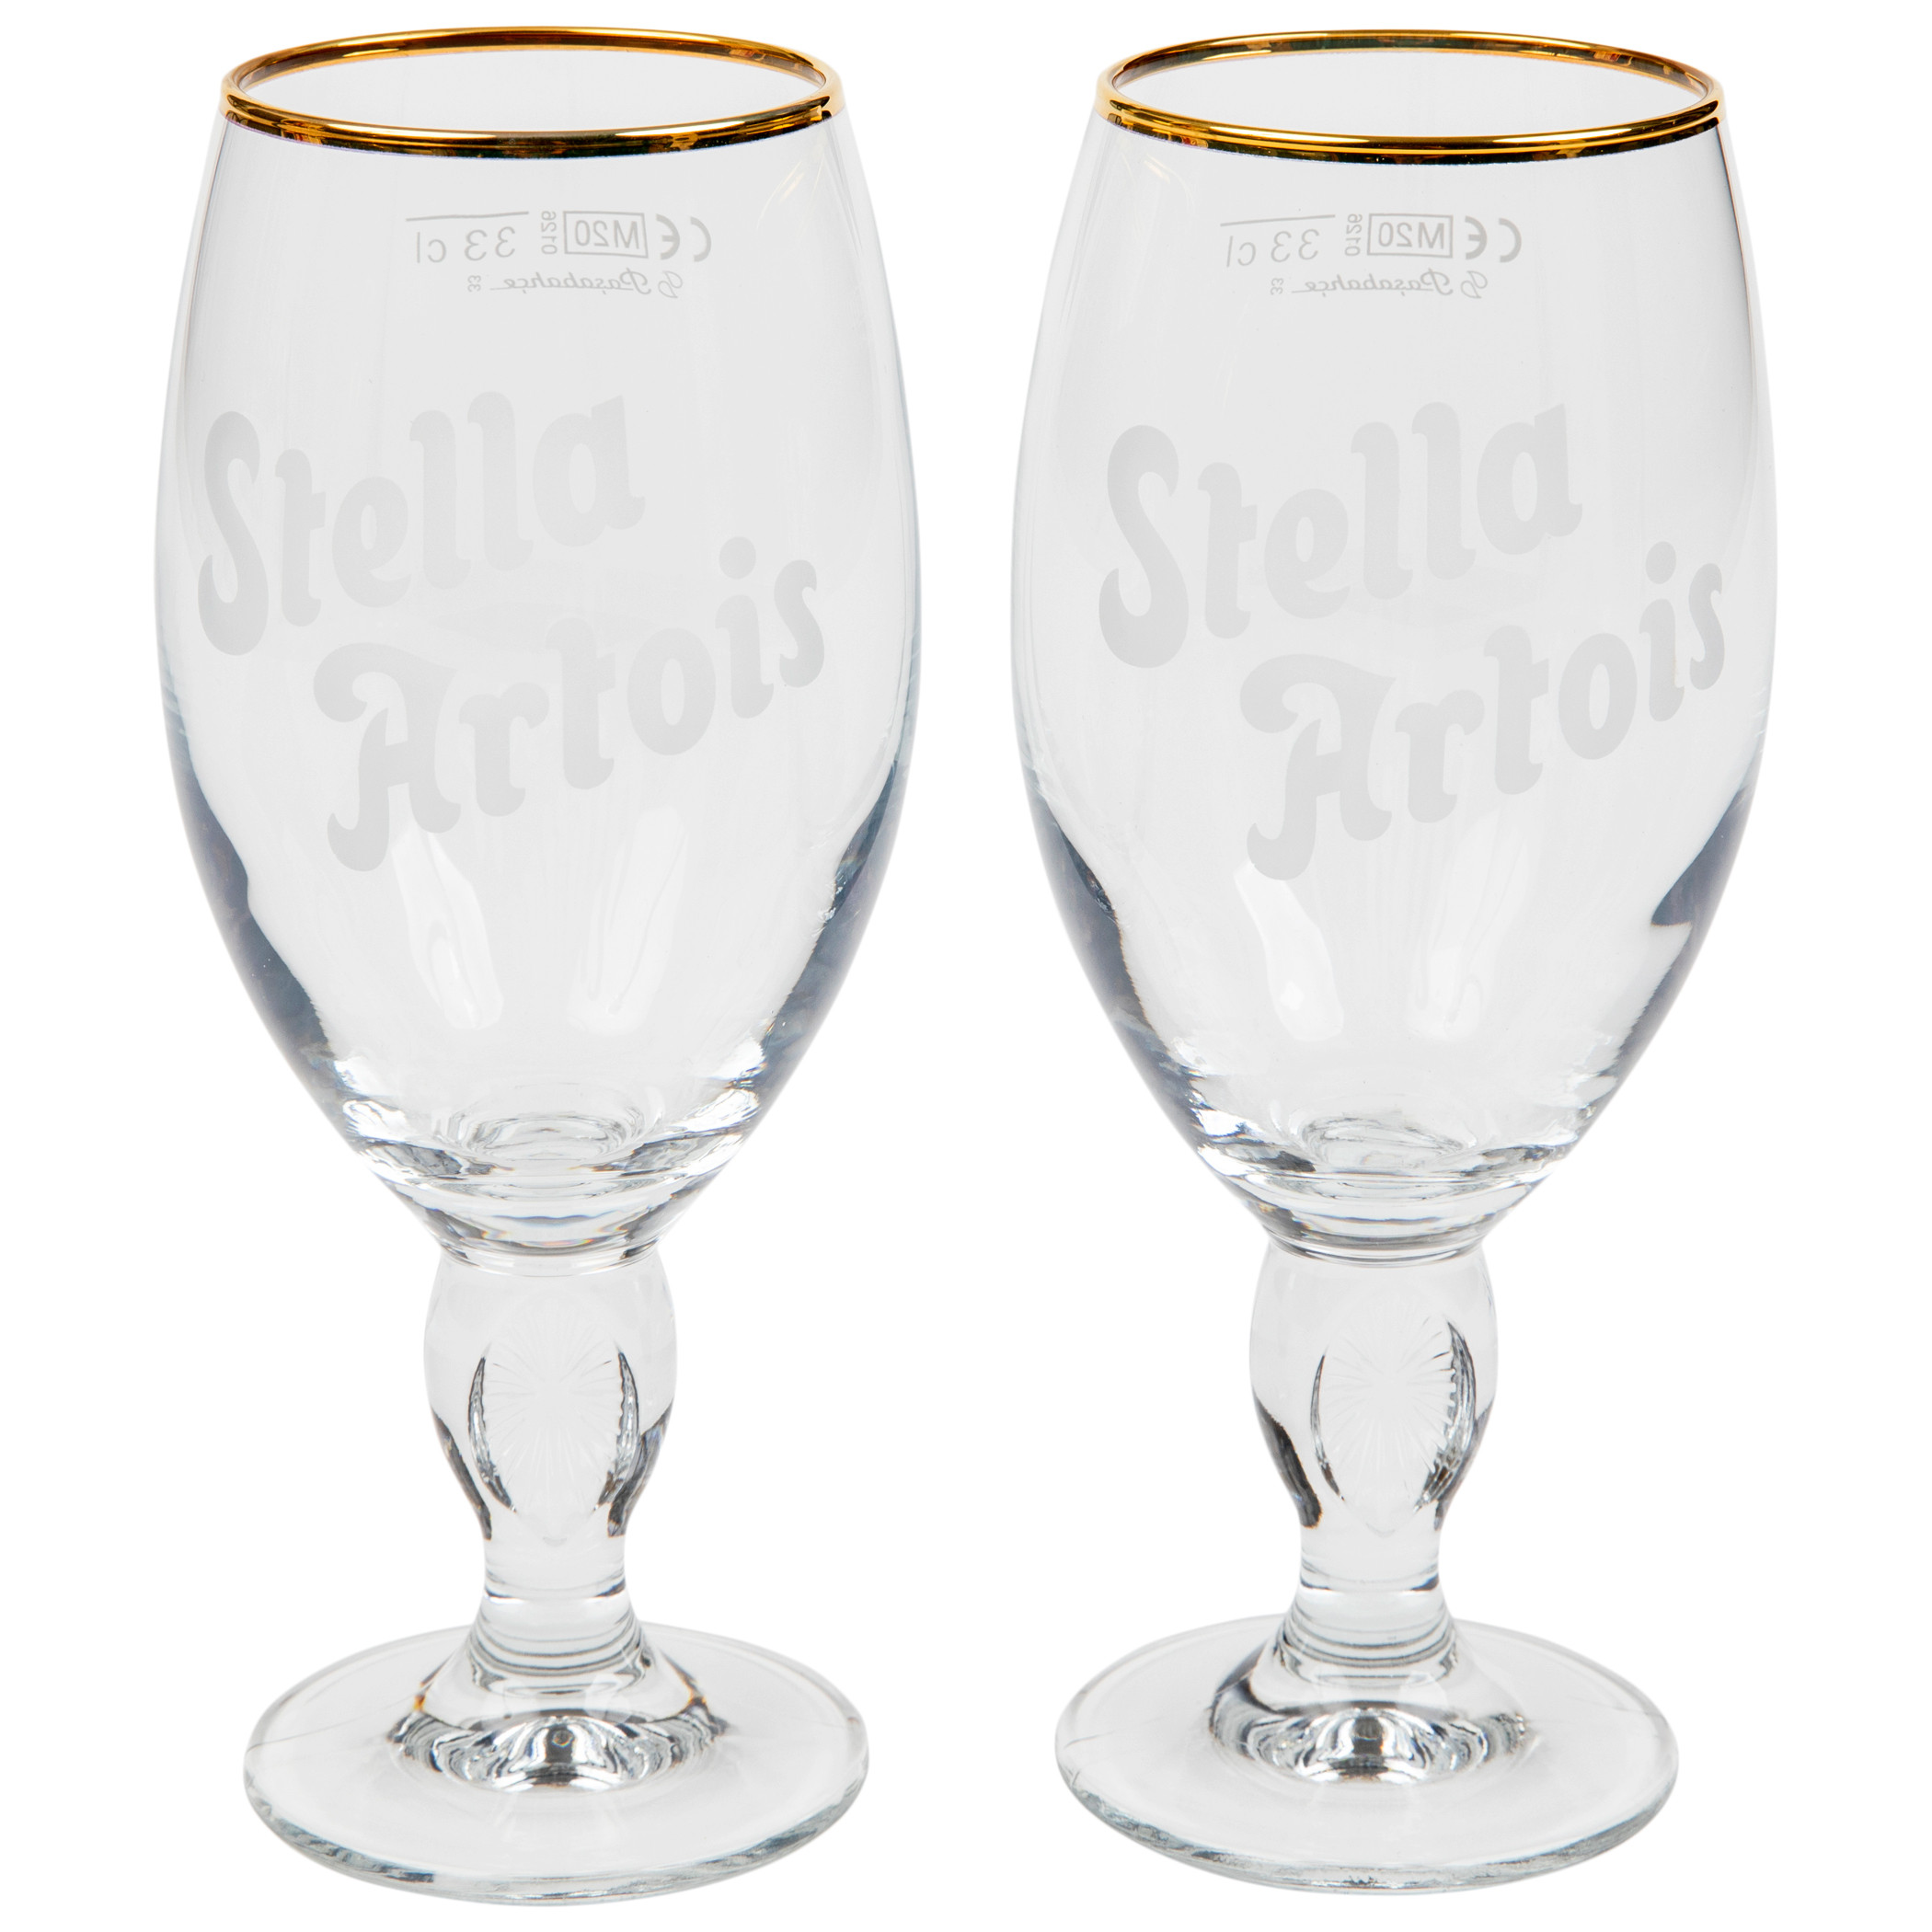 **NEW SET of 6** STELLA ARTOIS 40cl BEER GLASSES** NEW IN BOX**FREE SHIPPING*** 